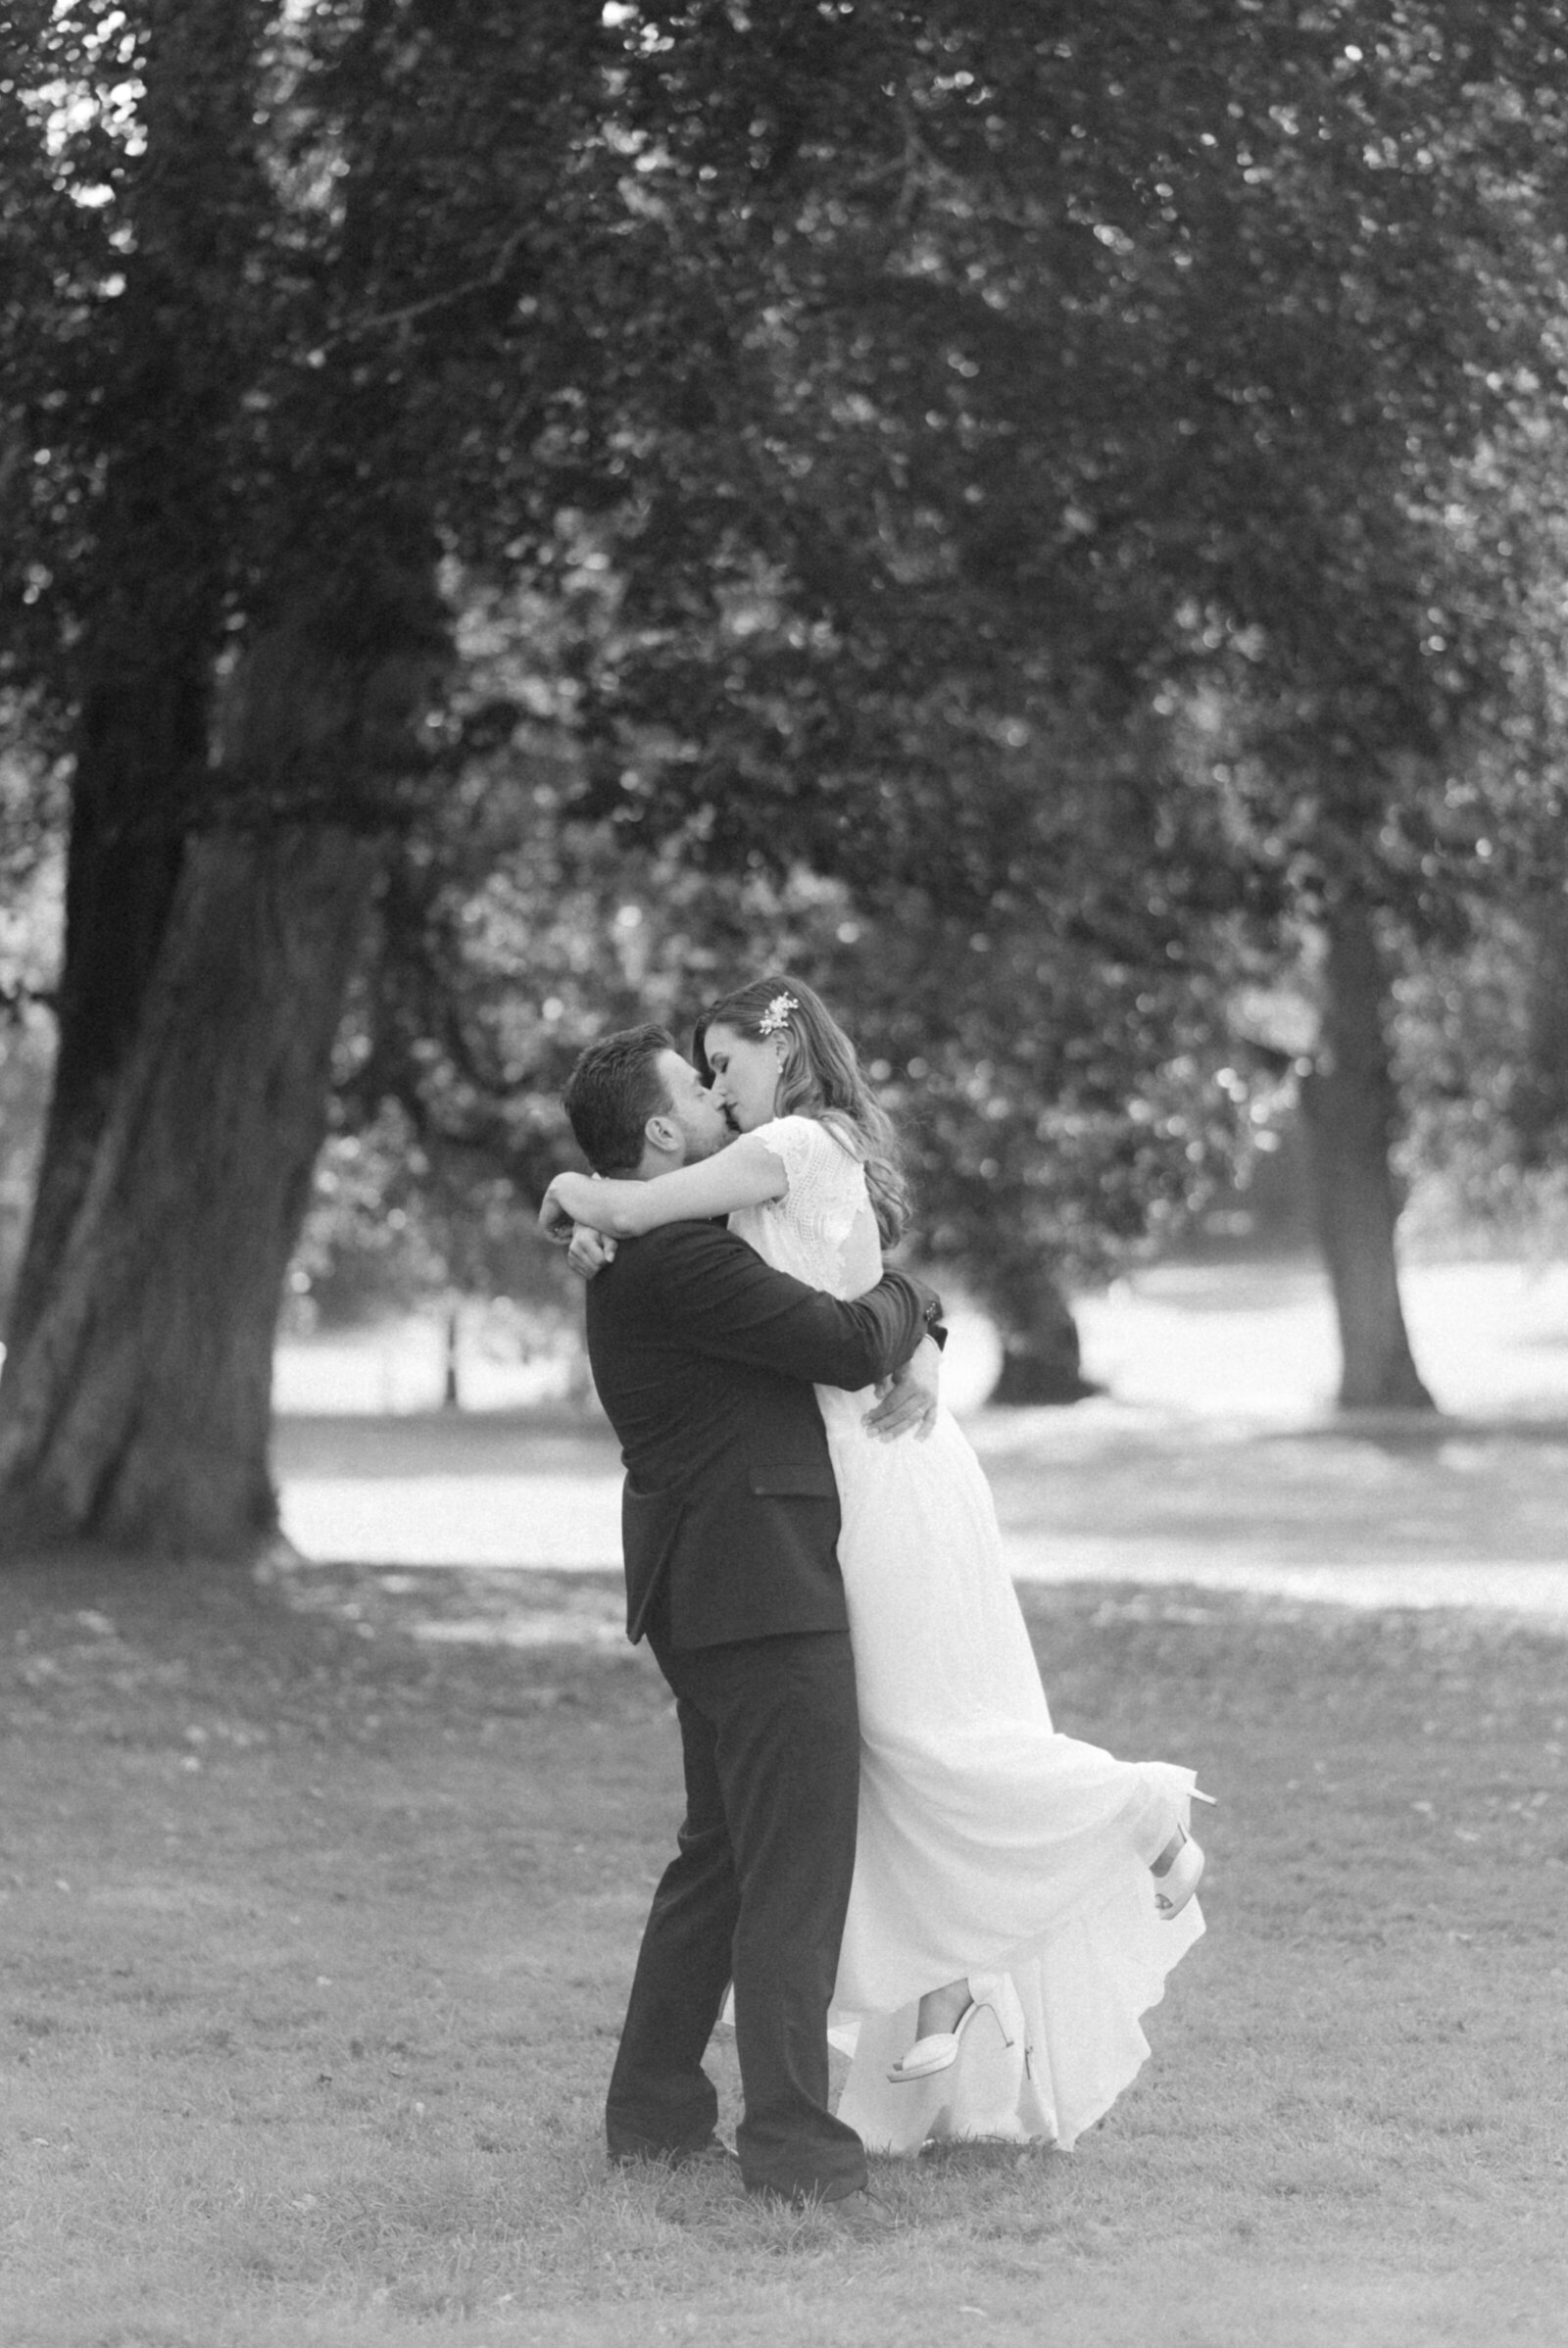 A wedding couple kissing in a black and white photograph by Finnish wedding photographer Hannika Gabrielsson.